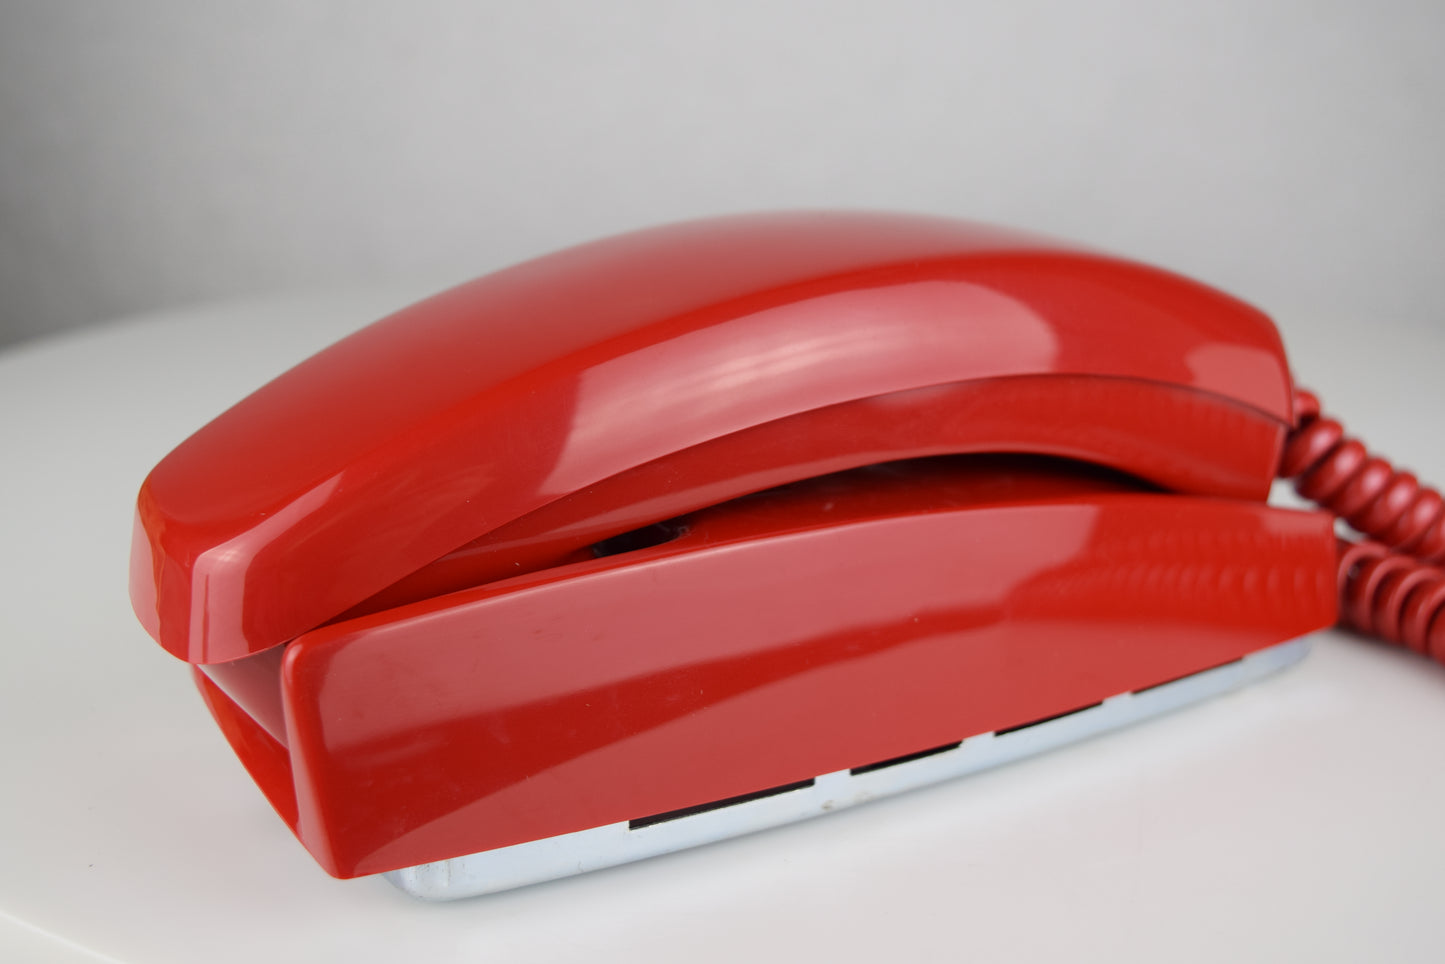 Rotary Dial Trimline Wall Phone - Red